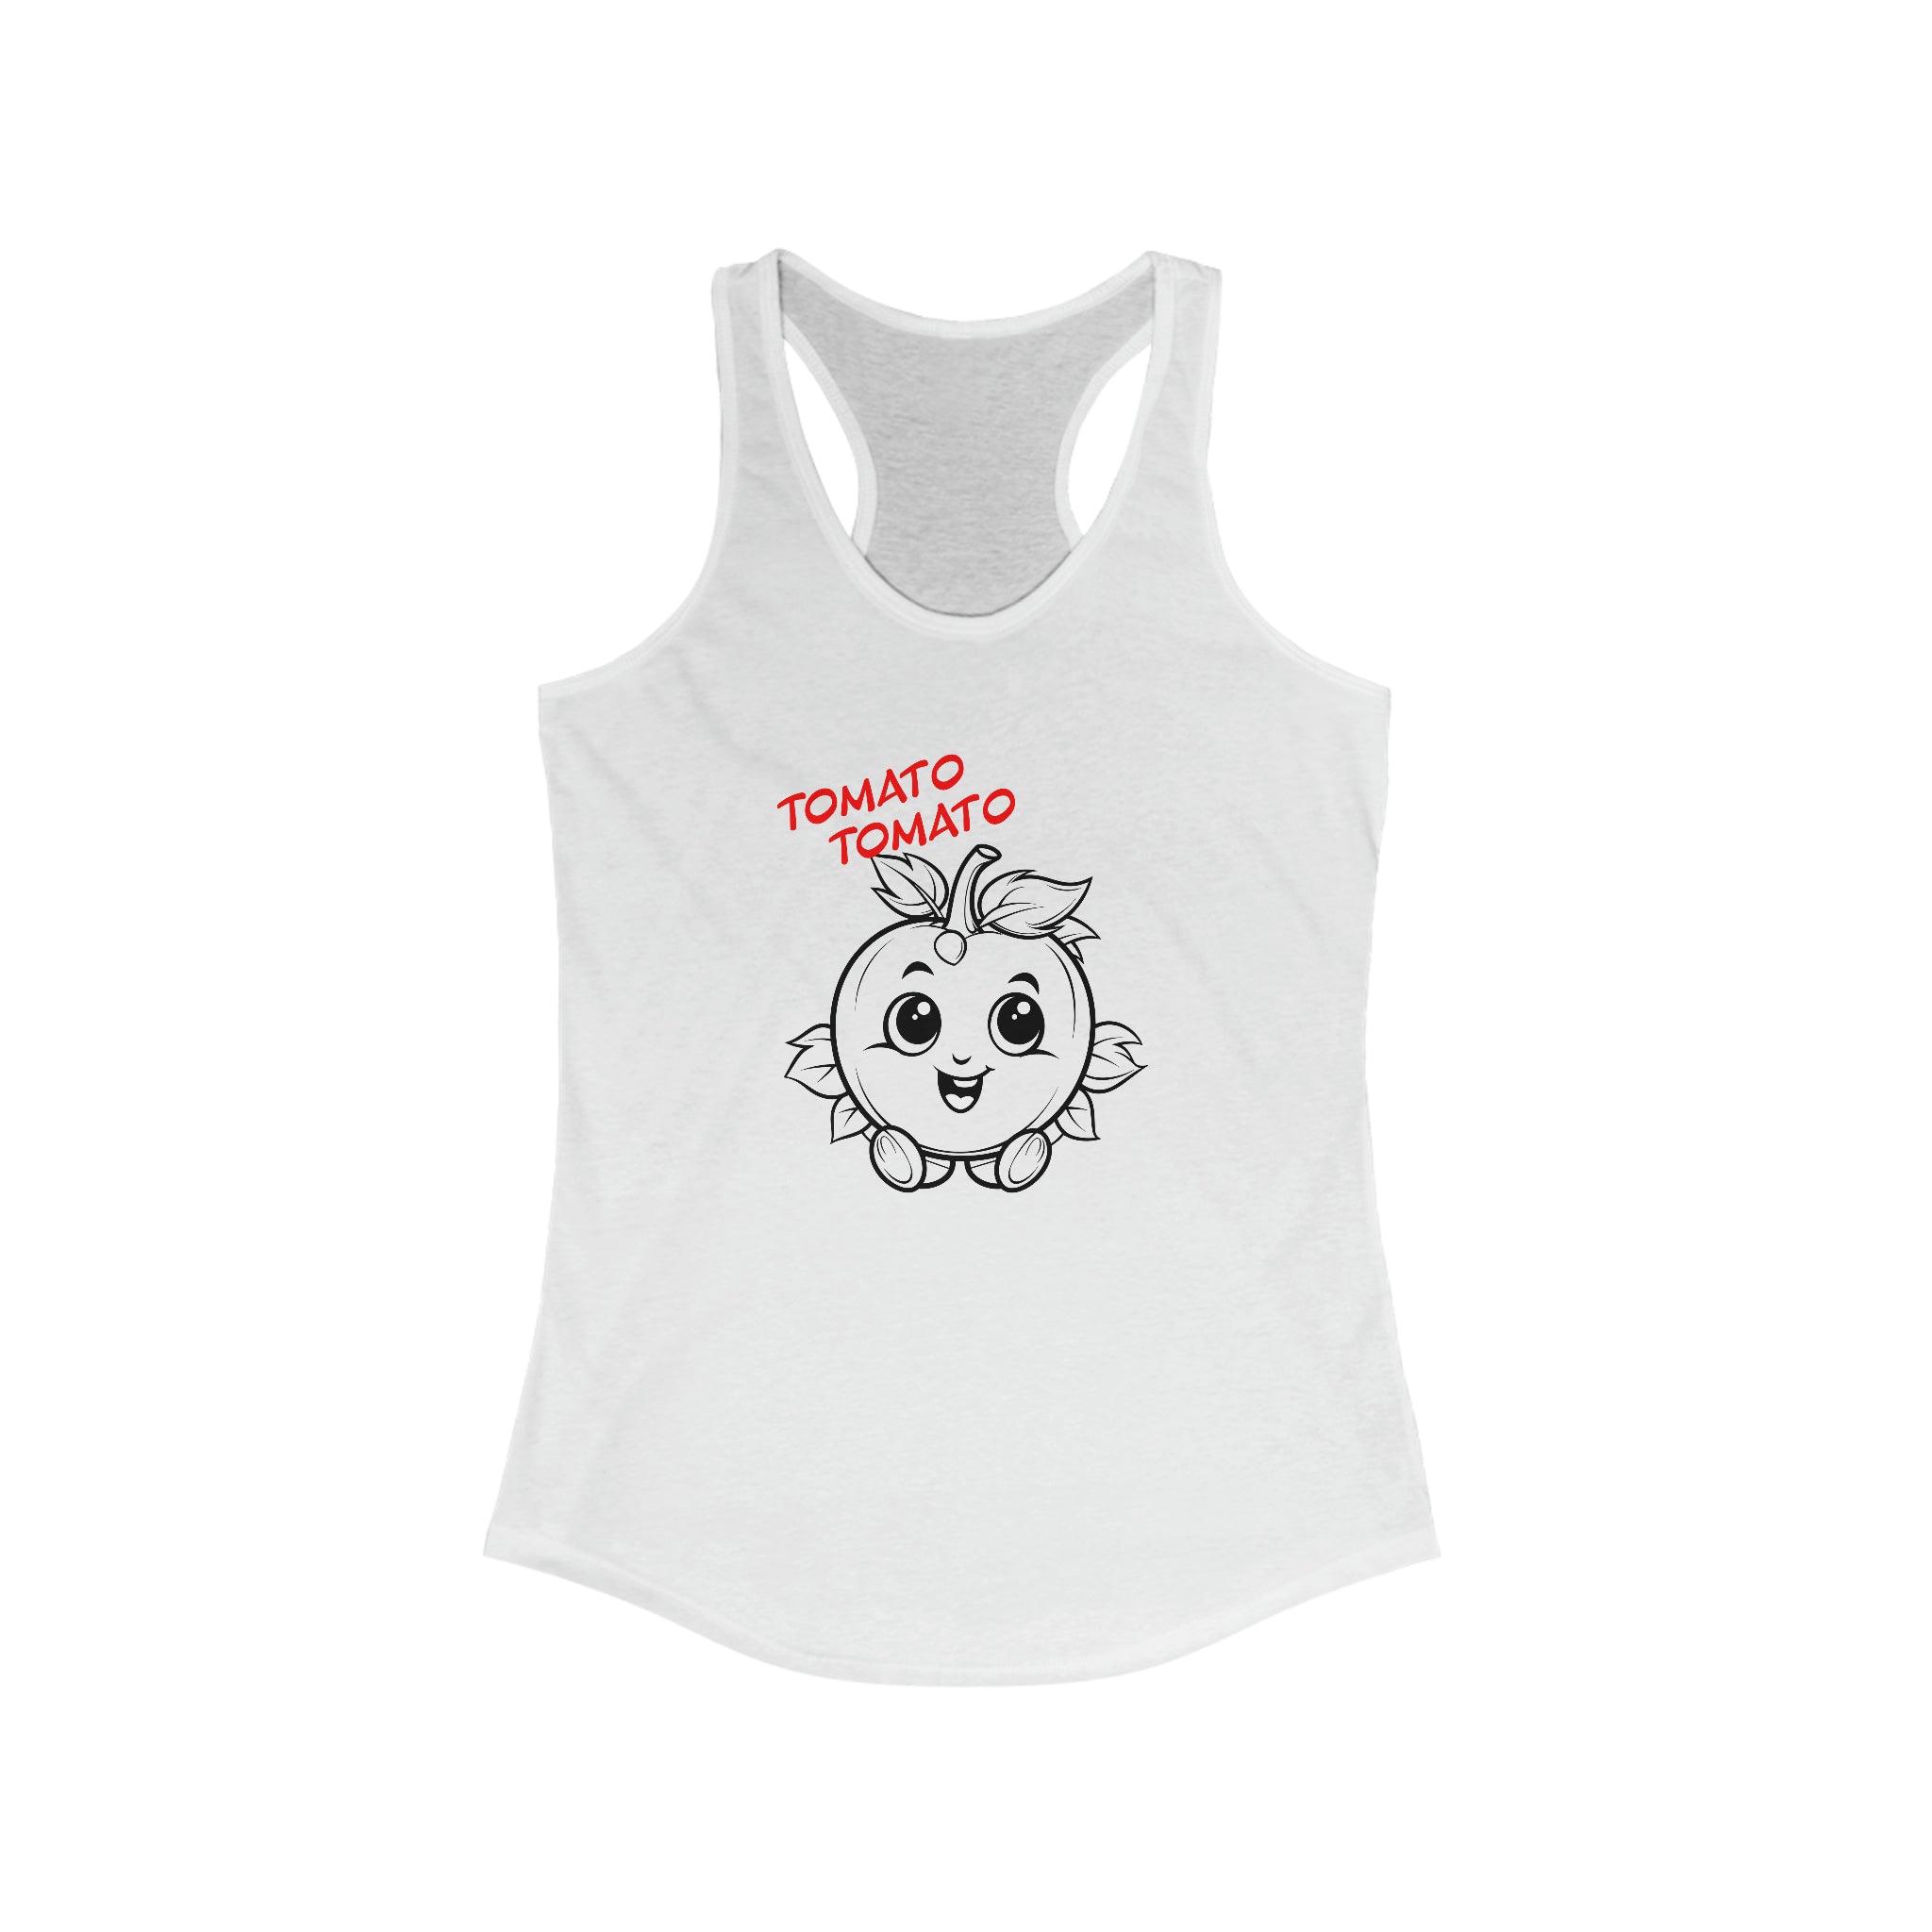 This 'Cute and Comfortable' Tank Top Is $22 at